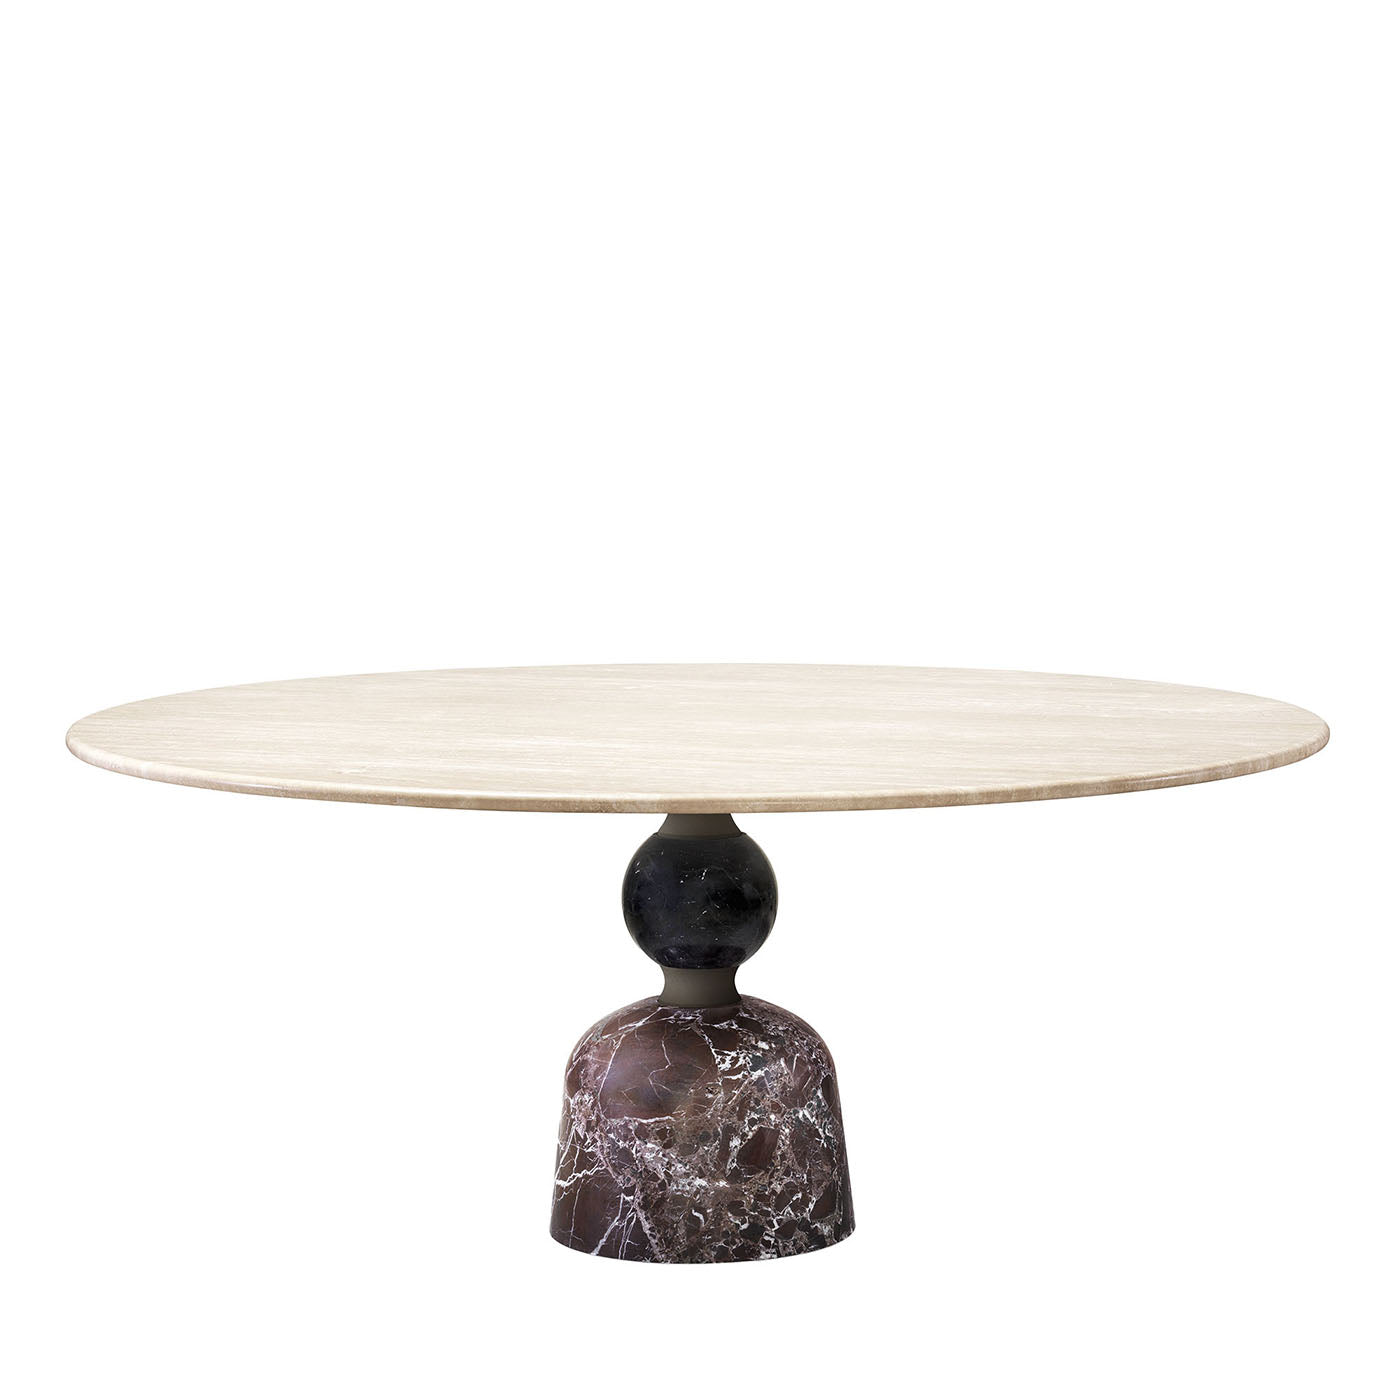 Artù Round Polychrome Marble Dining Table by Paolo Rizzatto #1 - Main view